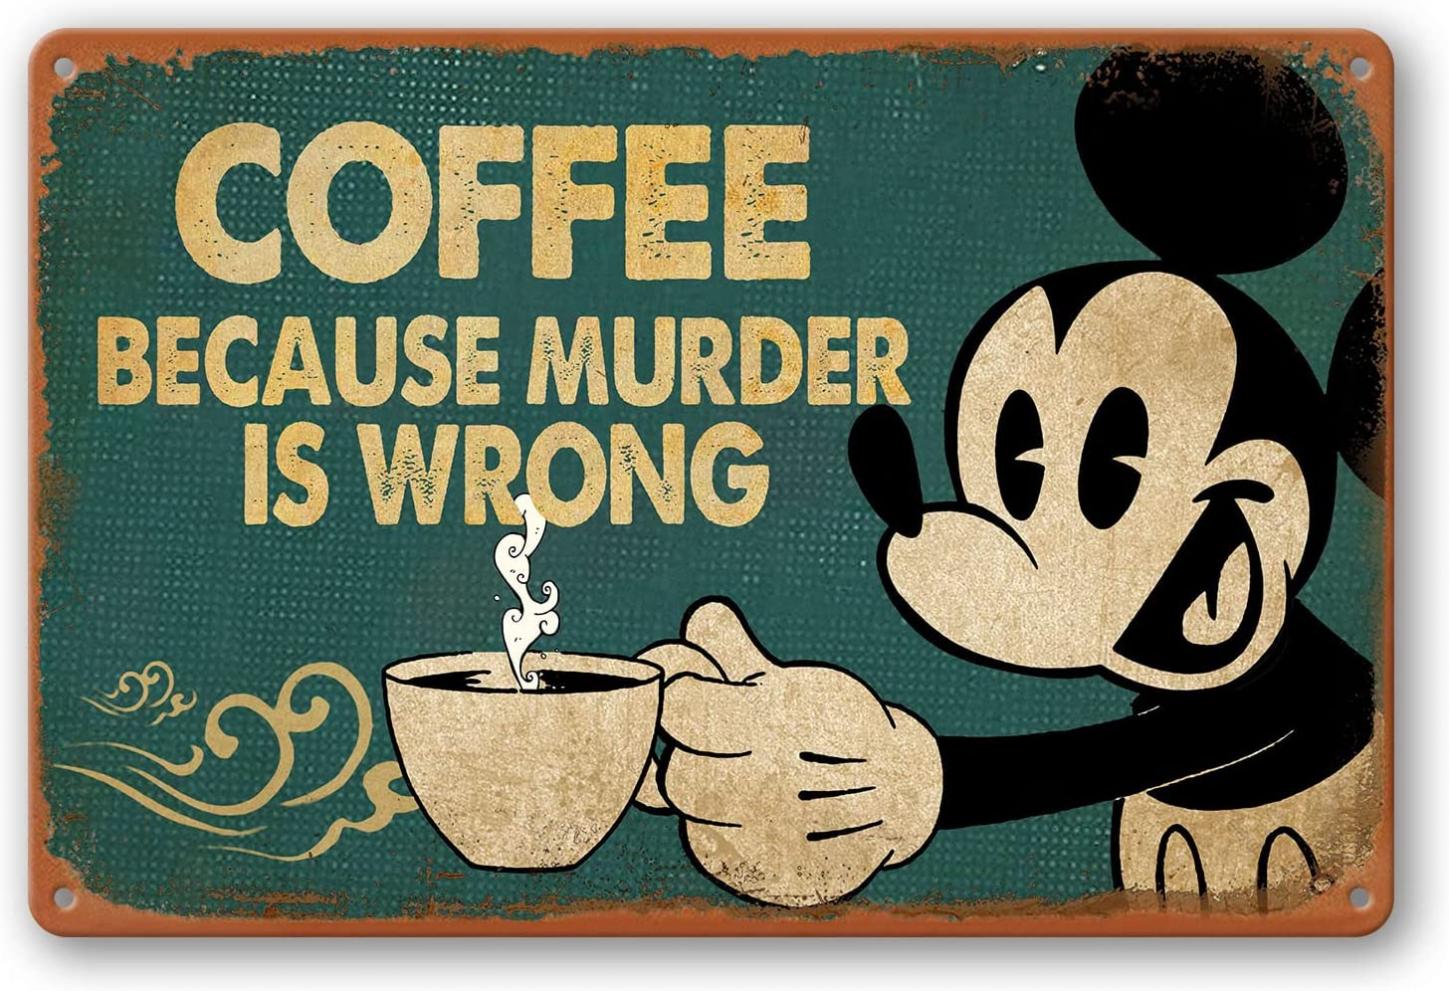 DOSEK Coffee Sign Kitchen Metal Tin Signs Wall Art Decor Vintage Metal Signs Retro Funny Coffee Bar Signs Because Murder Is Wrong Sign Decorations For Home 8x12 Inch